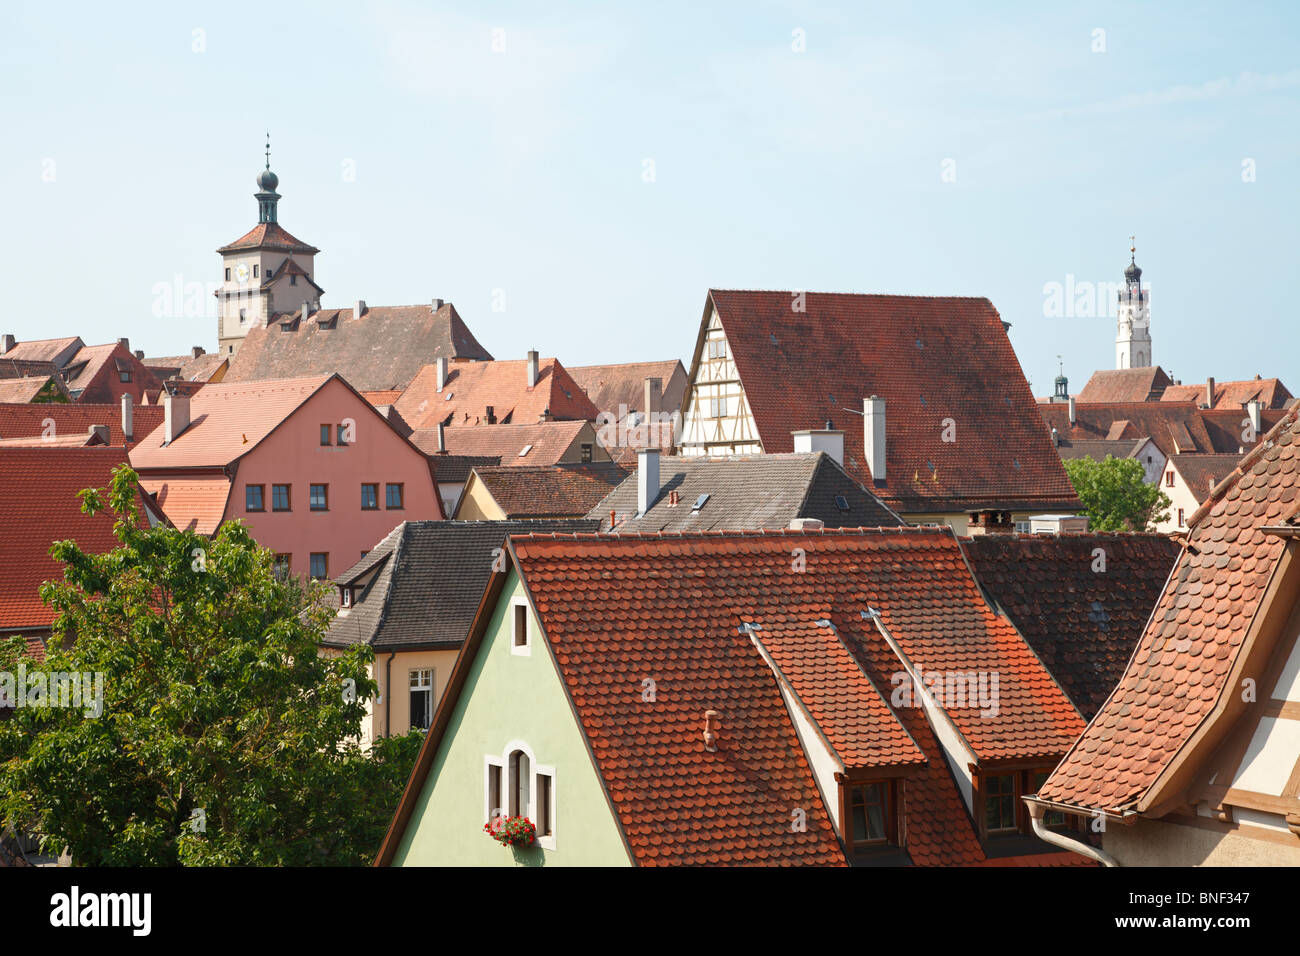 Skyline view from medieval ring wall, Rothenburg ob der Tauber, Franconia, Germany. Painted houses with red tile roofs. White Tower. City hall tower. Stock Photo